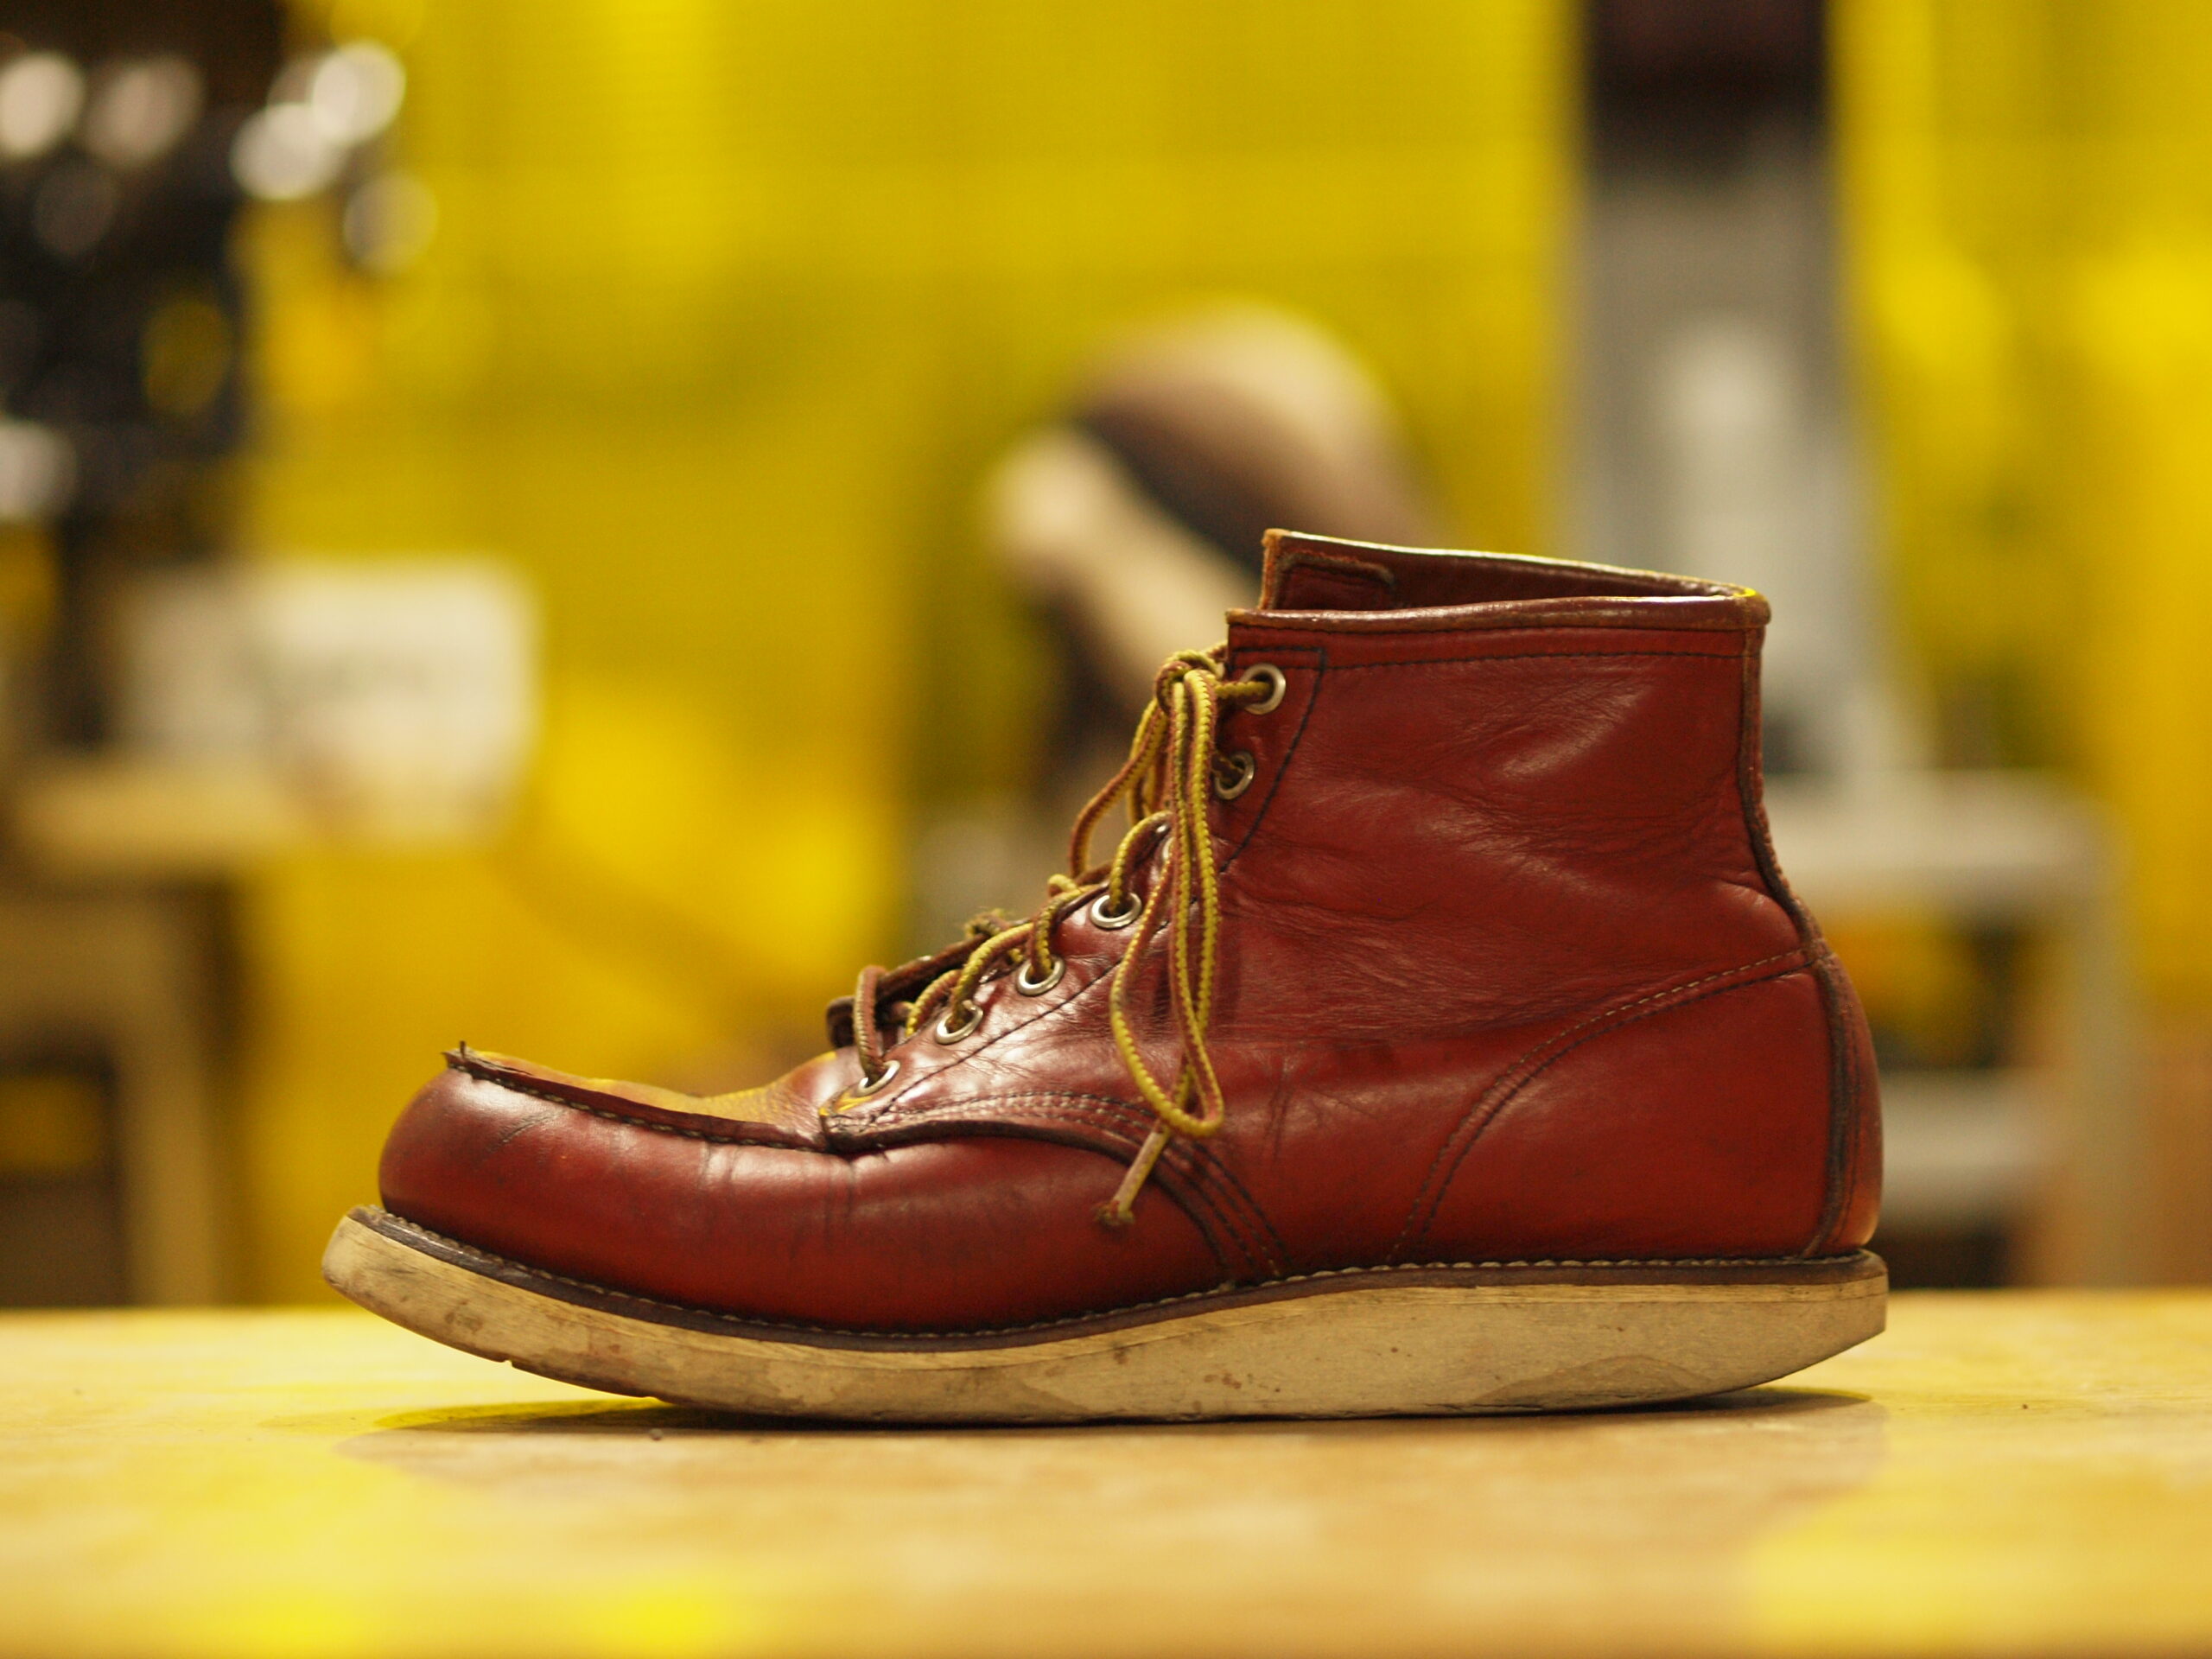 RED WING 875 レッドウイング ソール交換済み US7h D 25.5